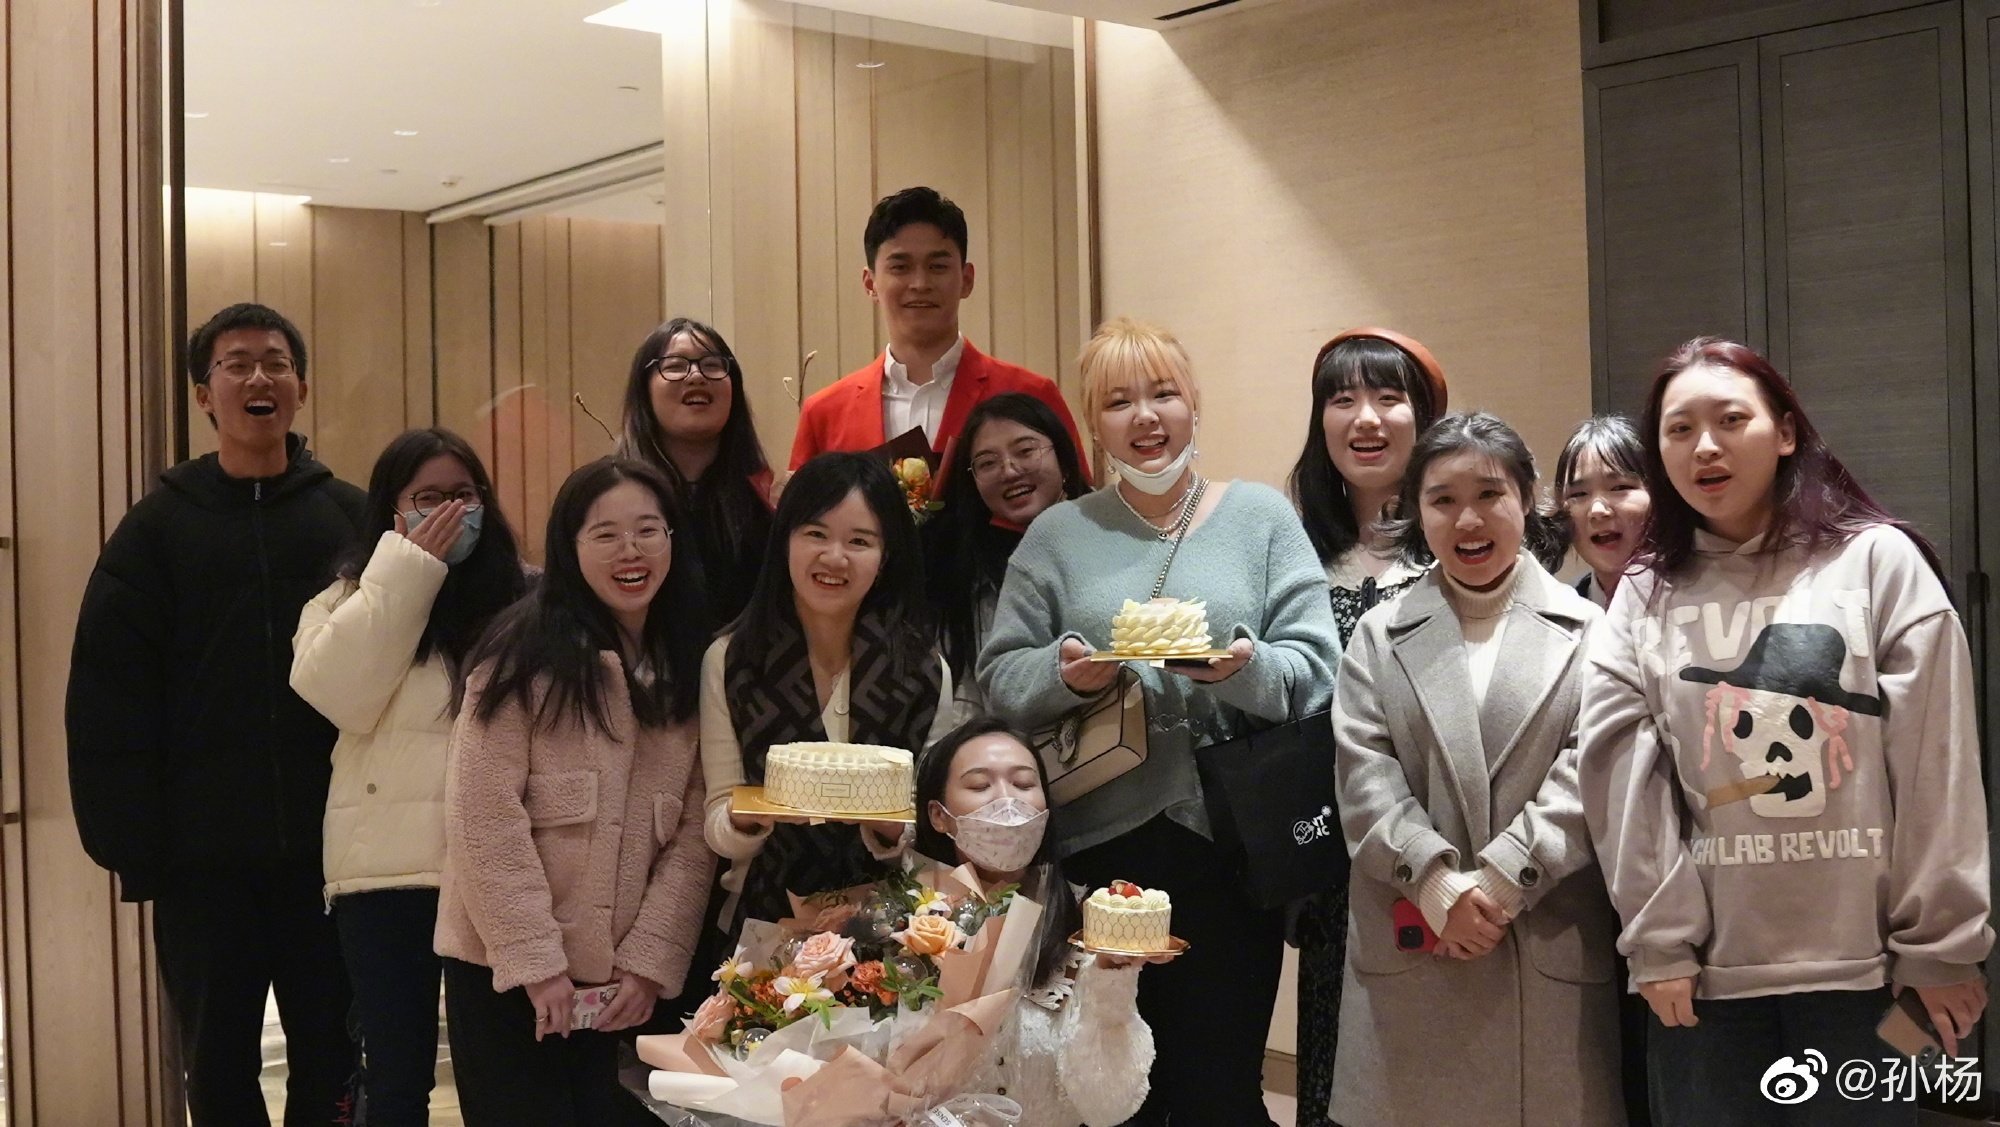 Sun Yang celebrates his 30th birthday with fans at a hotel in Hangzhou. Photo: Handout